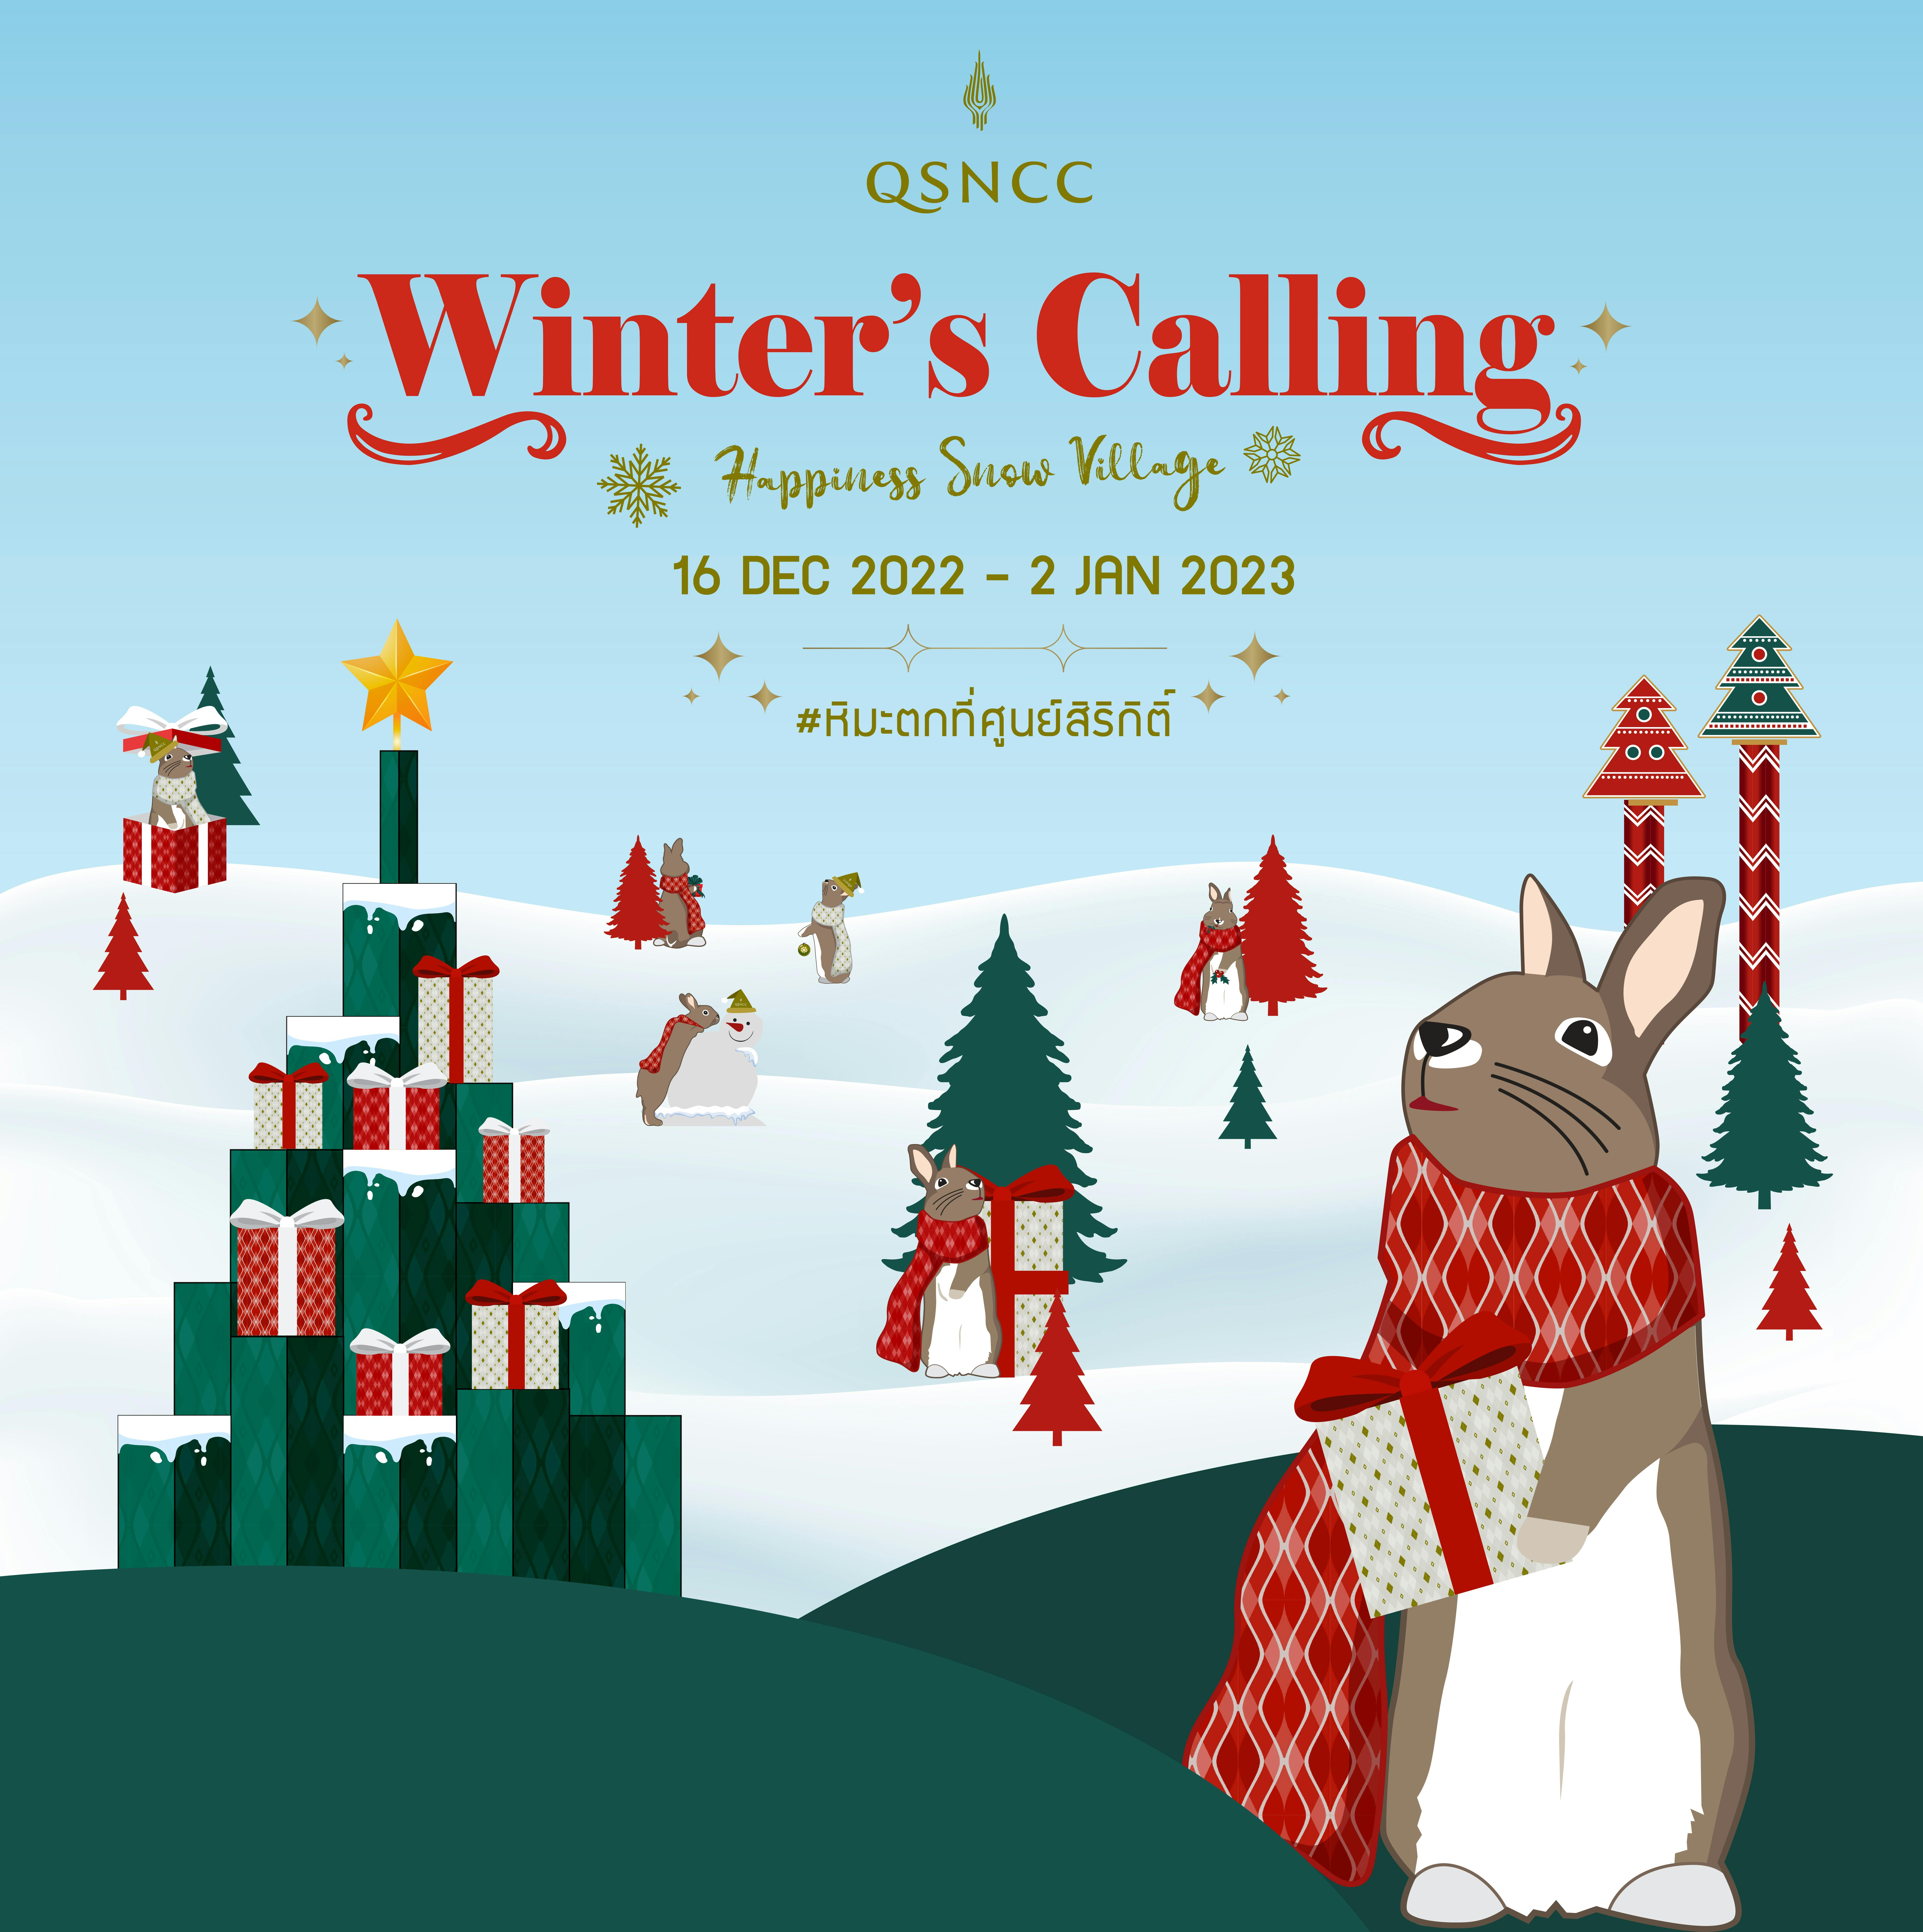 Winter’s Calling! Let's Celebrate White Christmas at QSNCC